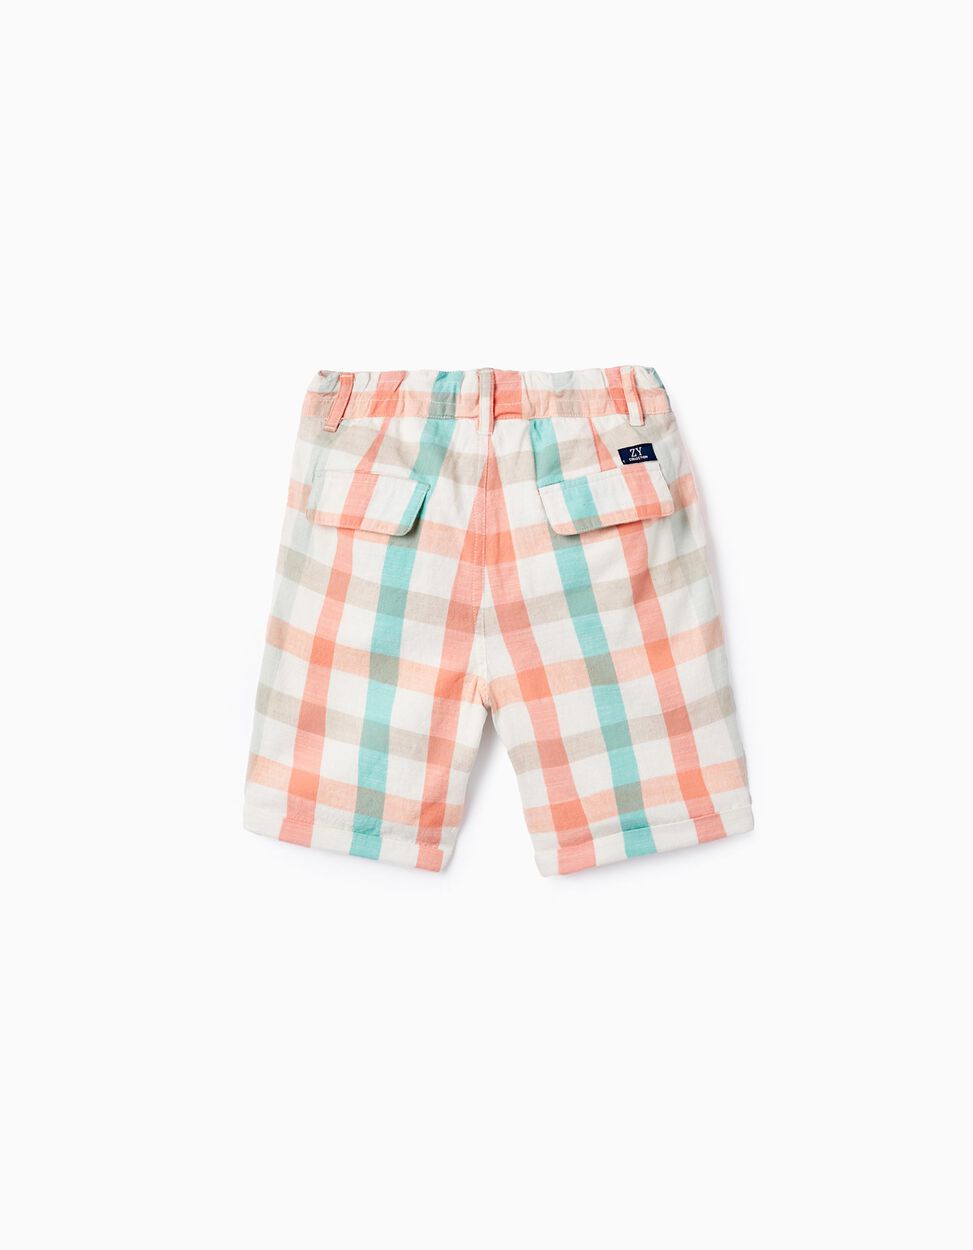 Buy Online Checkered Cotton Shorts for Boys 'B&S', Aqua Green/Coral